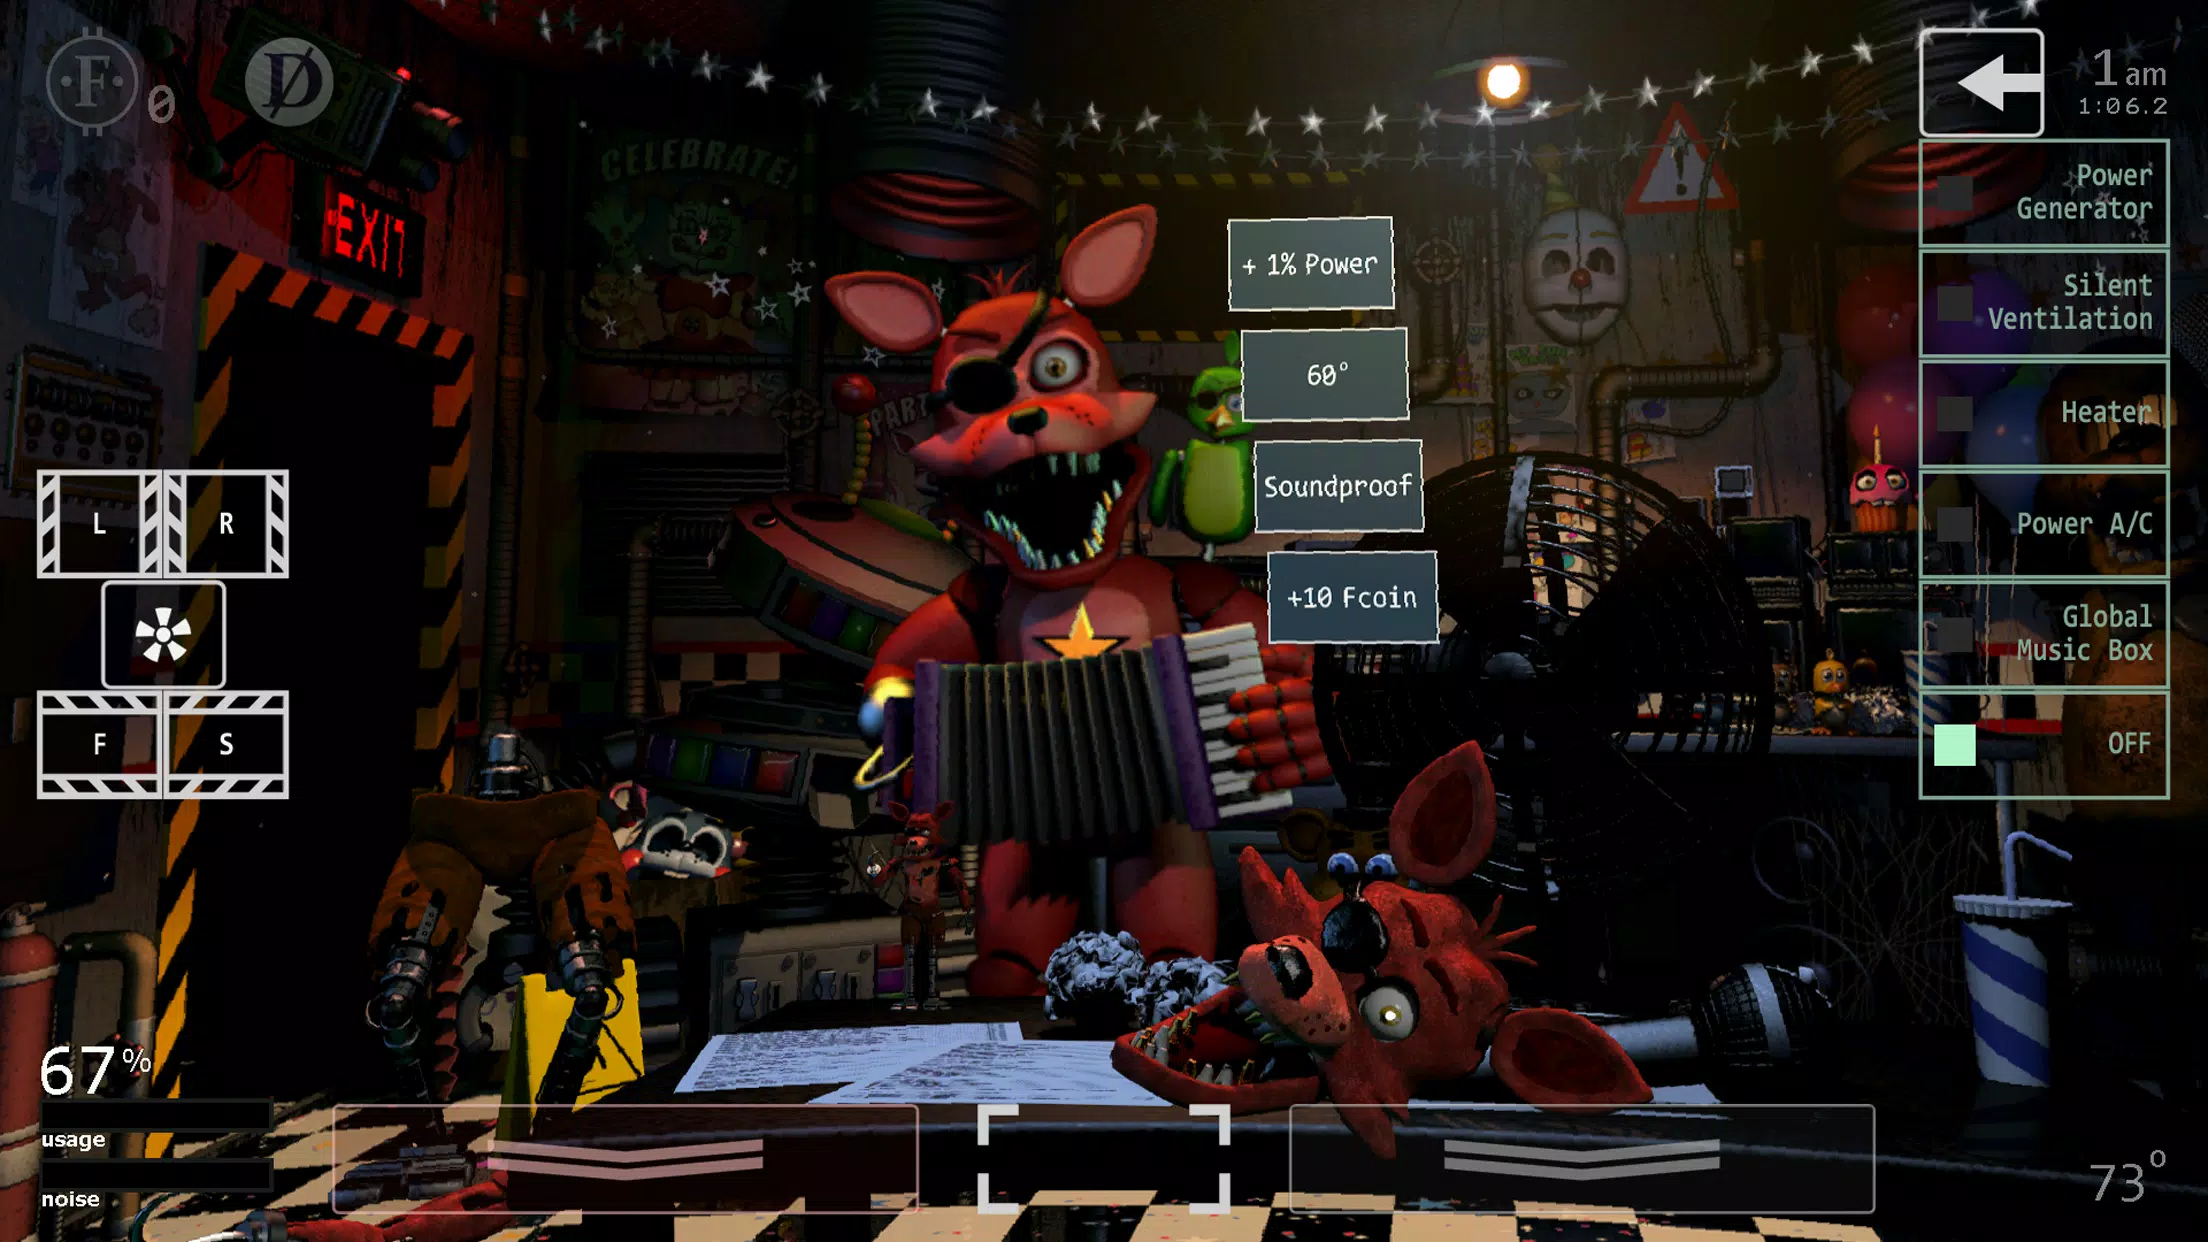 Ultimate Custom Night APK (Android Game) v1.0.6 Free Download